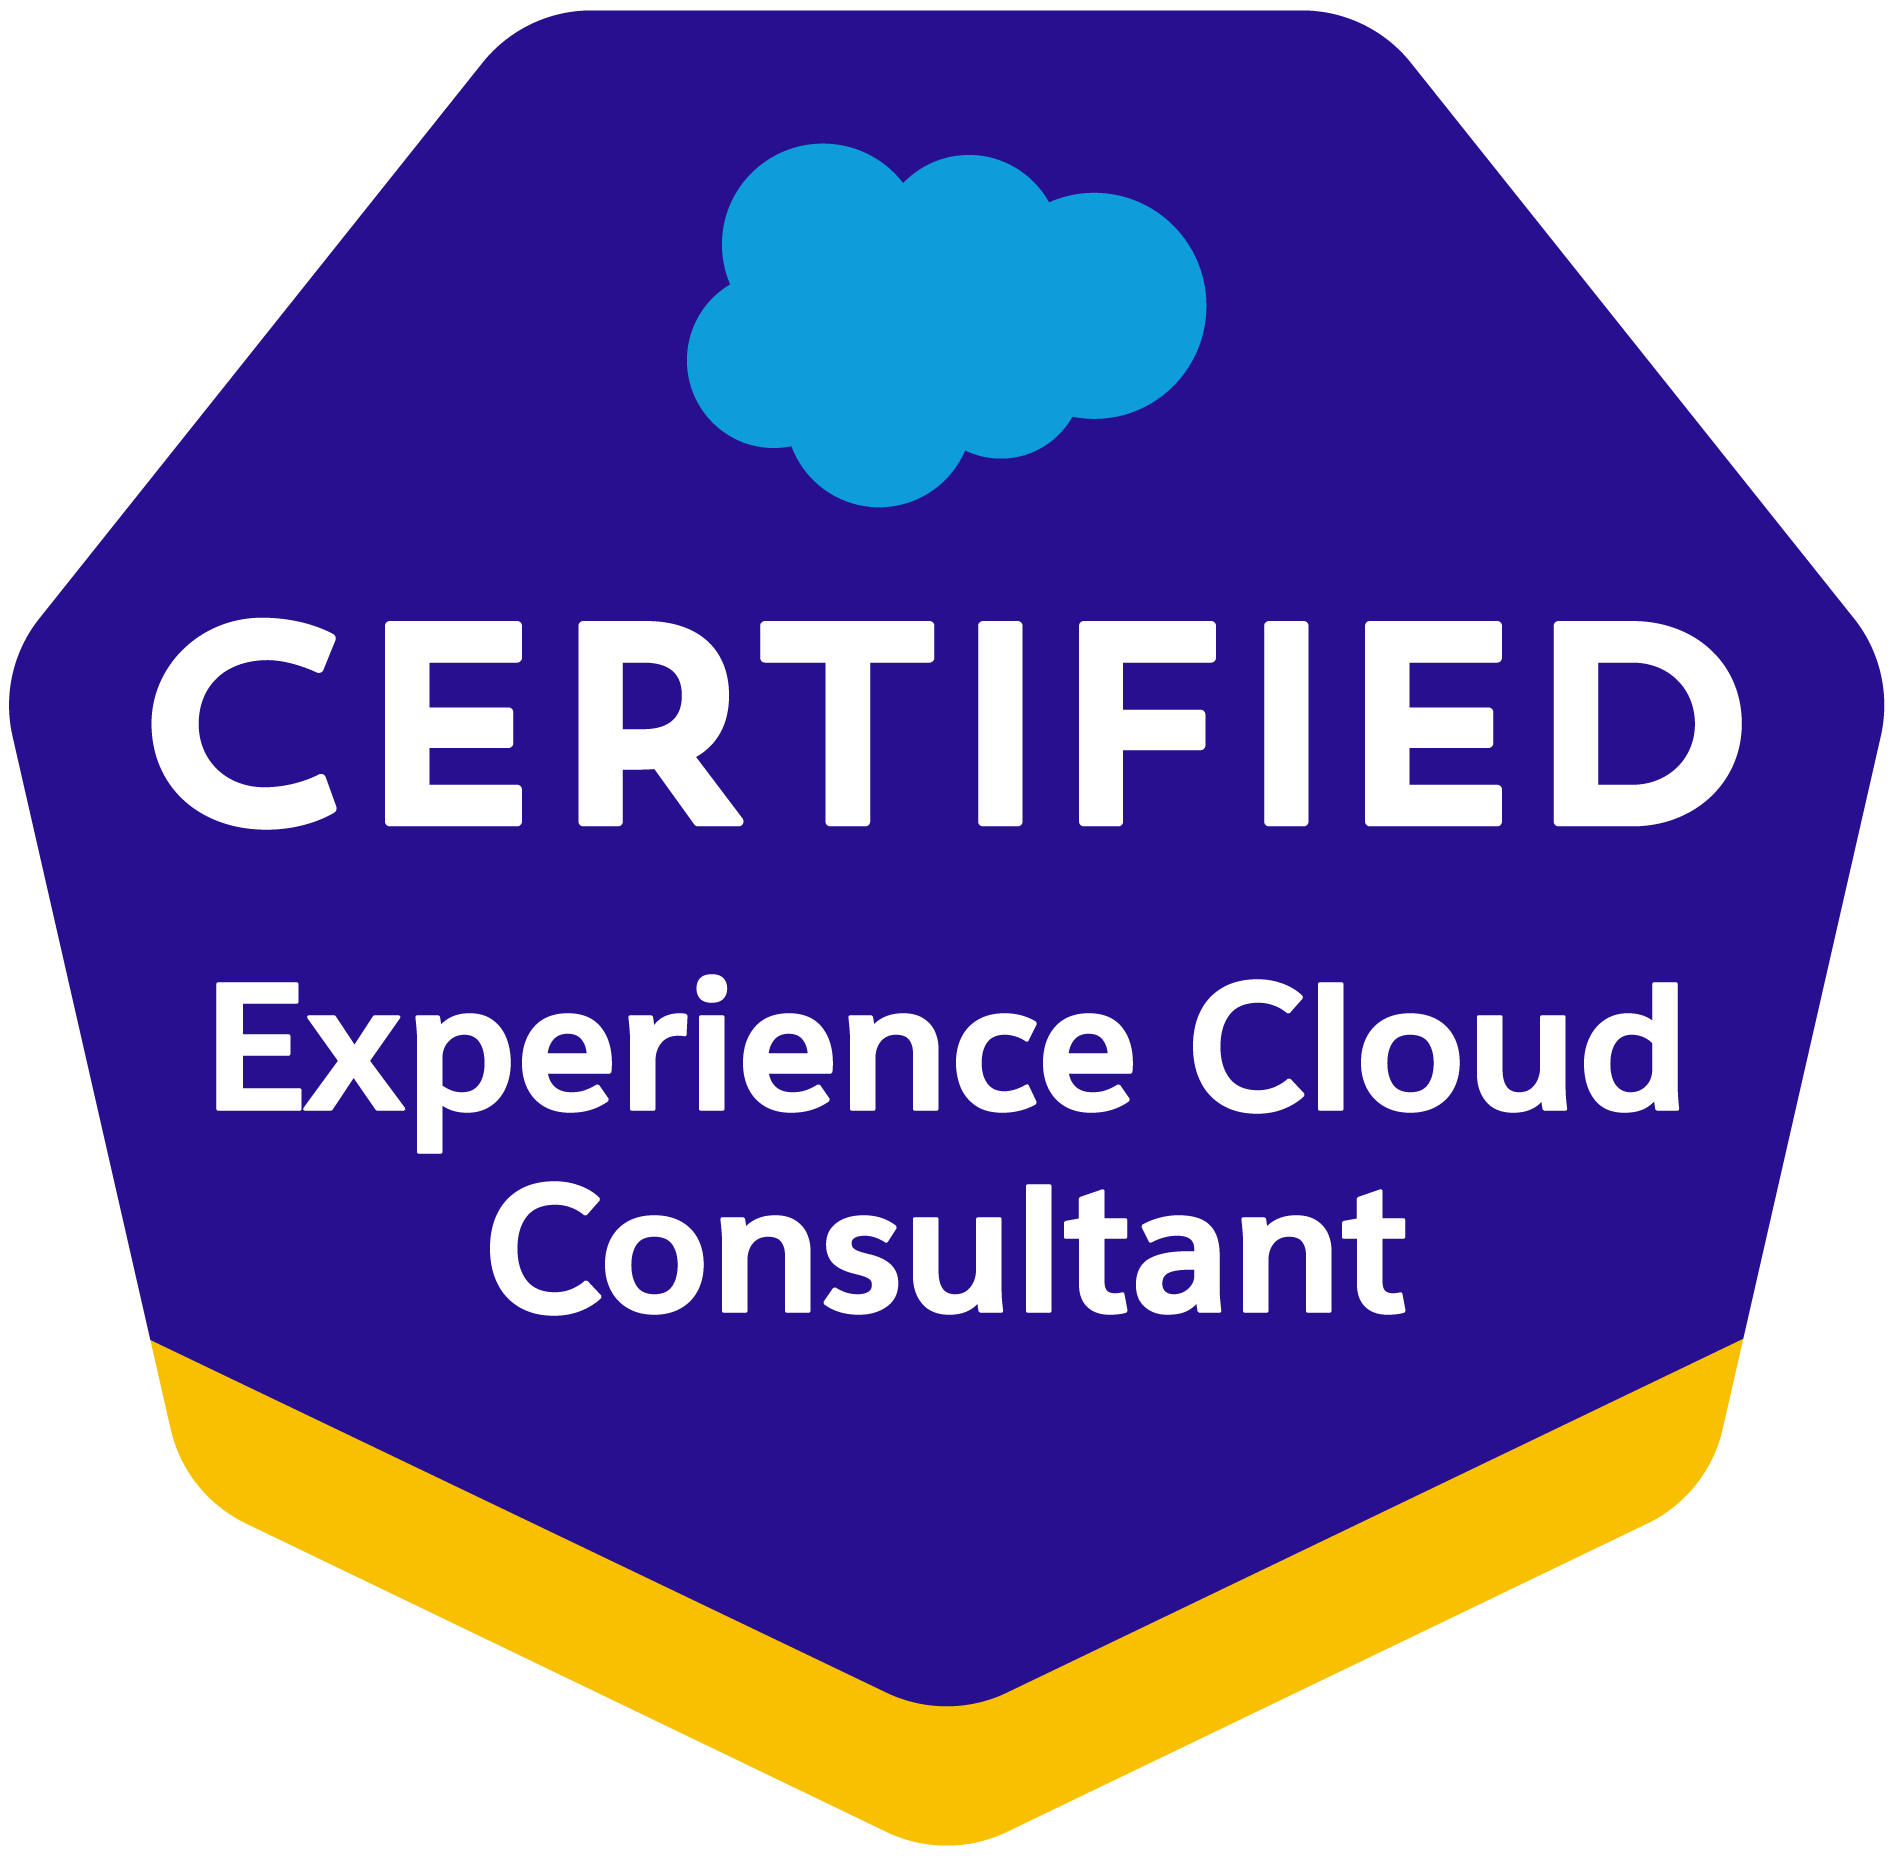 Certified Experience Cloud Consultant